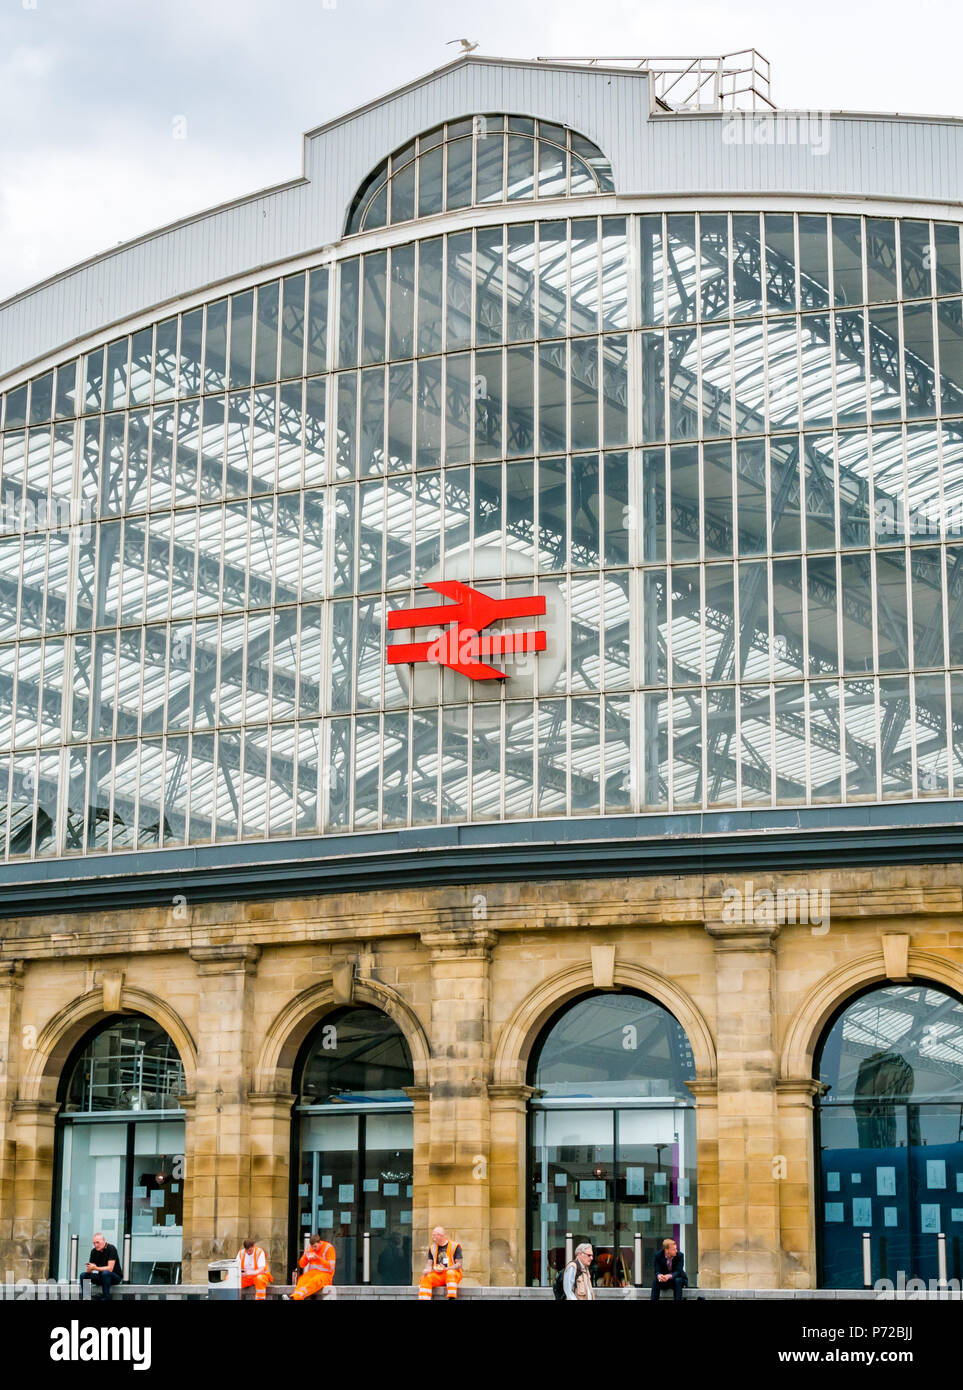 Curved glass roof of Liverpool Lime Street mainline railway station with Network Rail symbol, Liverpool, England, UK Stock Photo